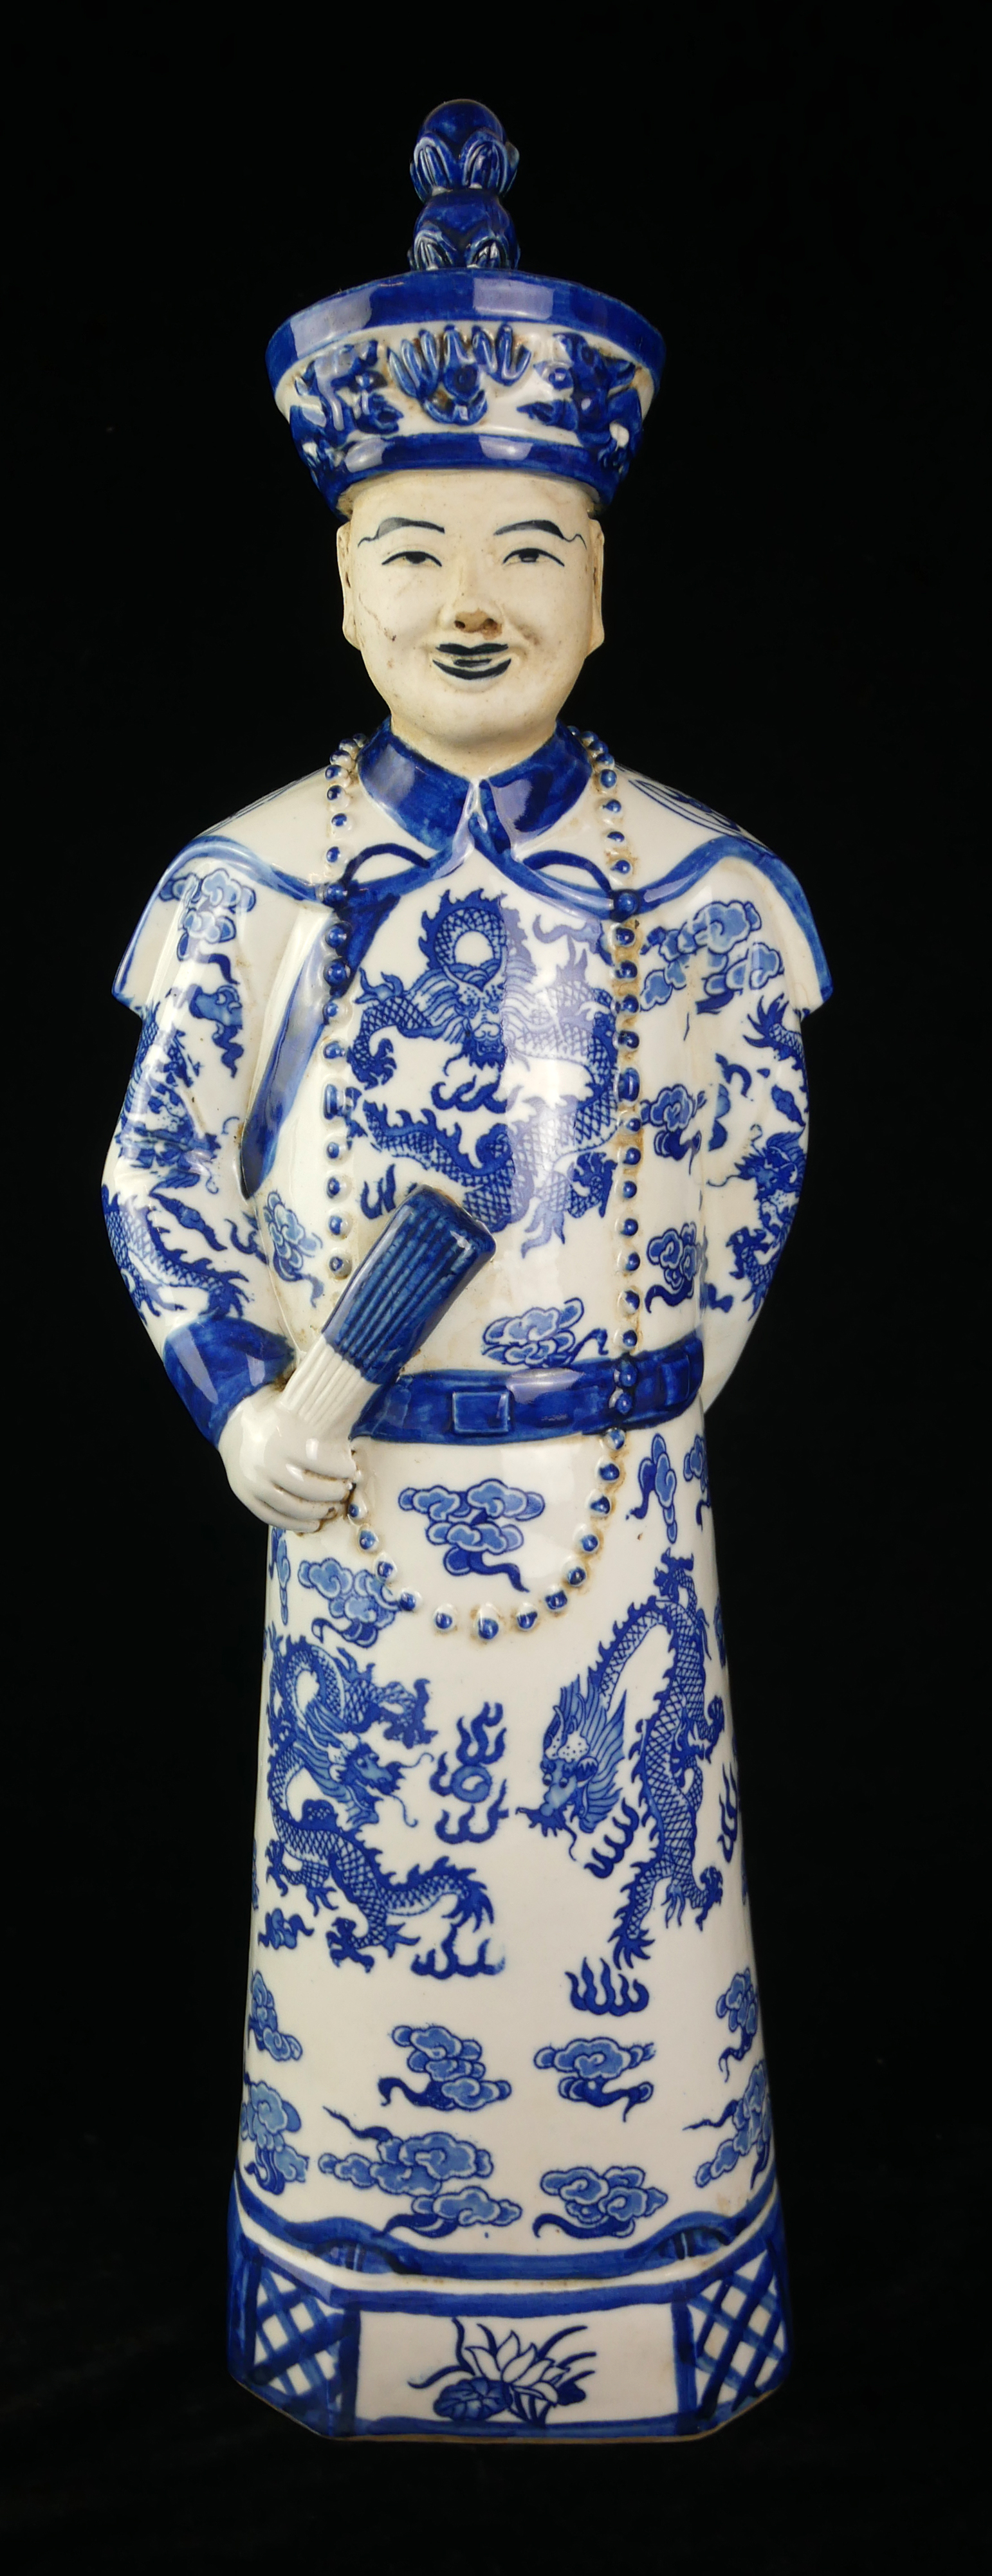 A CHINESE BLUE AND WHITE PORCELAIN EMPEROR FIGURE Standing pose wearing a robe with opposing dragons